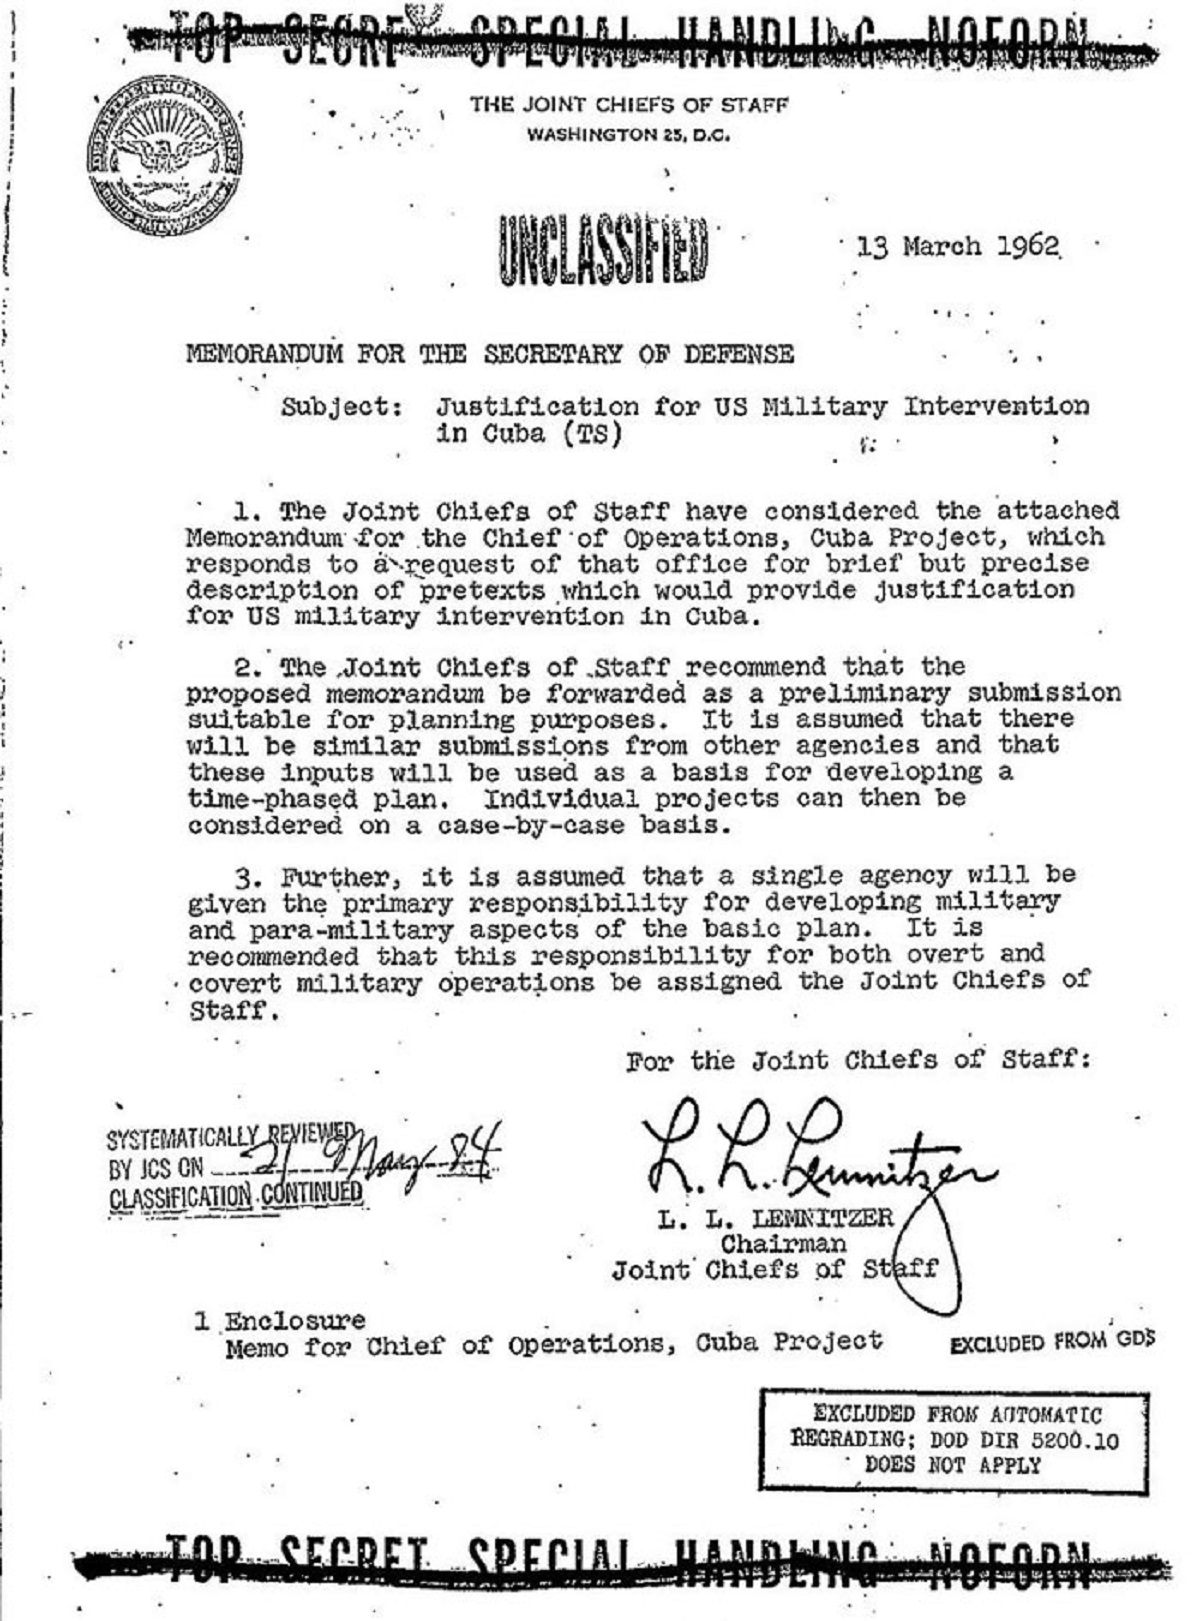 Operation Northwoods. The DoD proposed that CIA operatives plant bombs around the United States and commit terrorist acts and blame them on Cuba. This was approved all the way up to, but not including, the President.